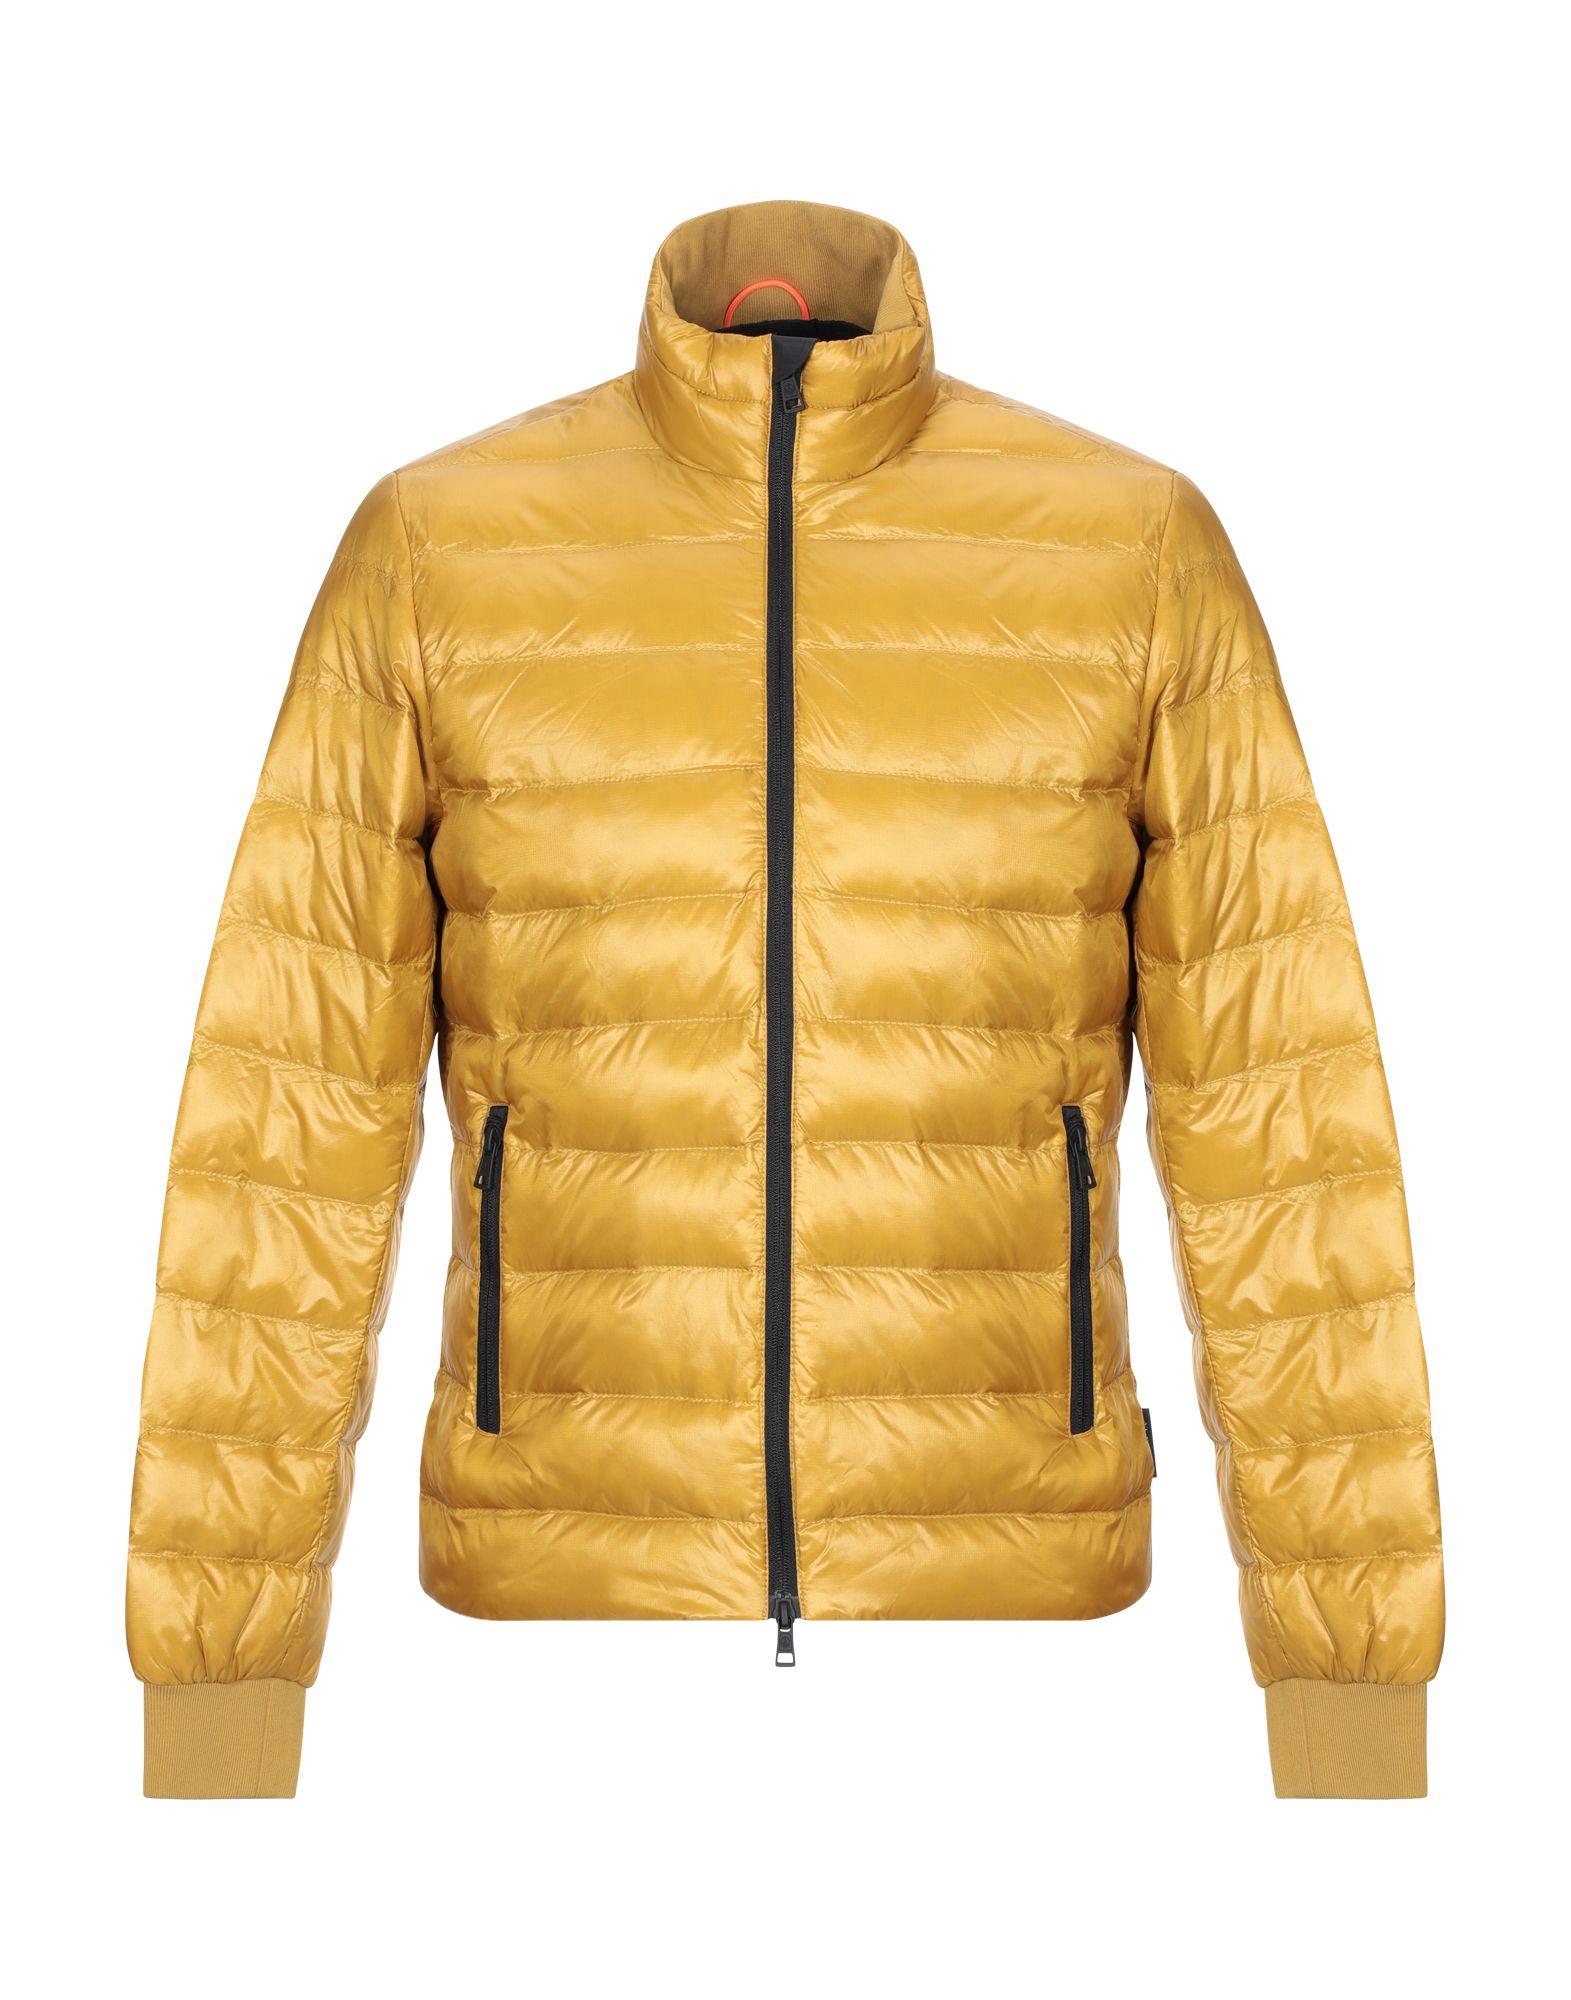 AT.P.CO Goose Down Jacket in Yellow for Men - Lyst